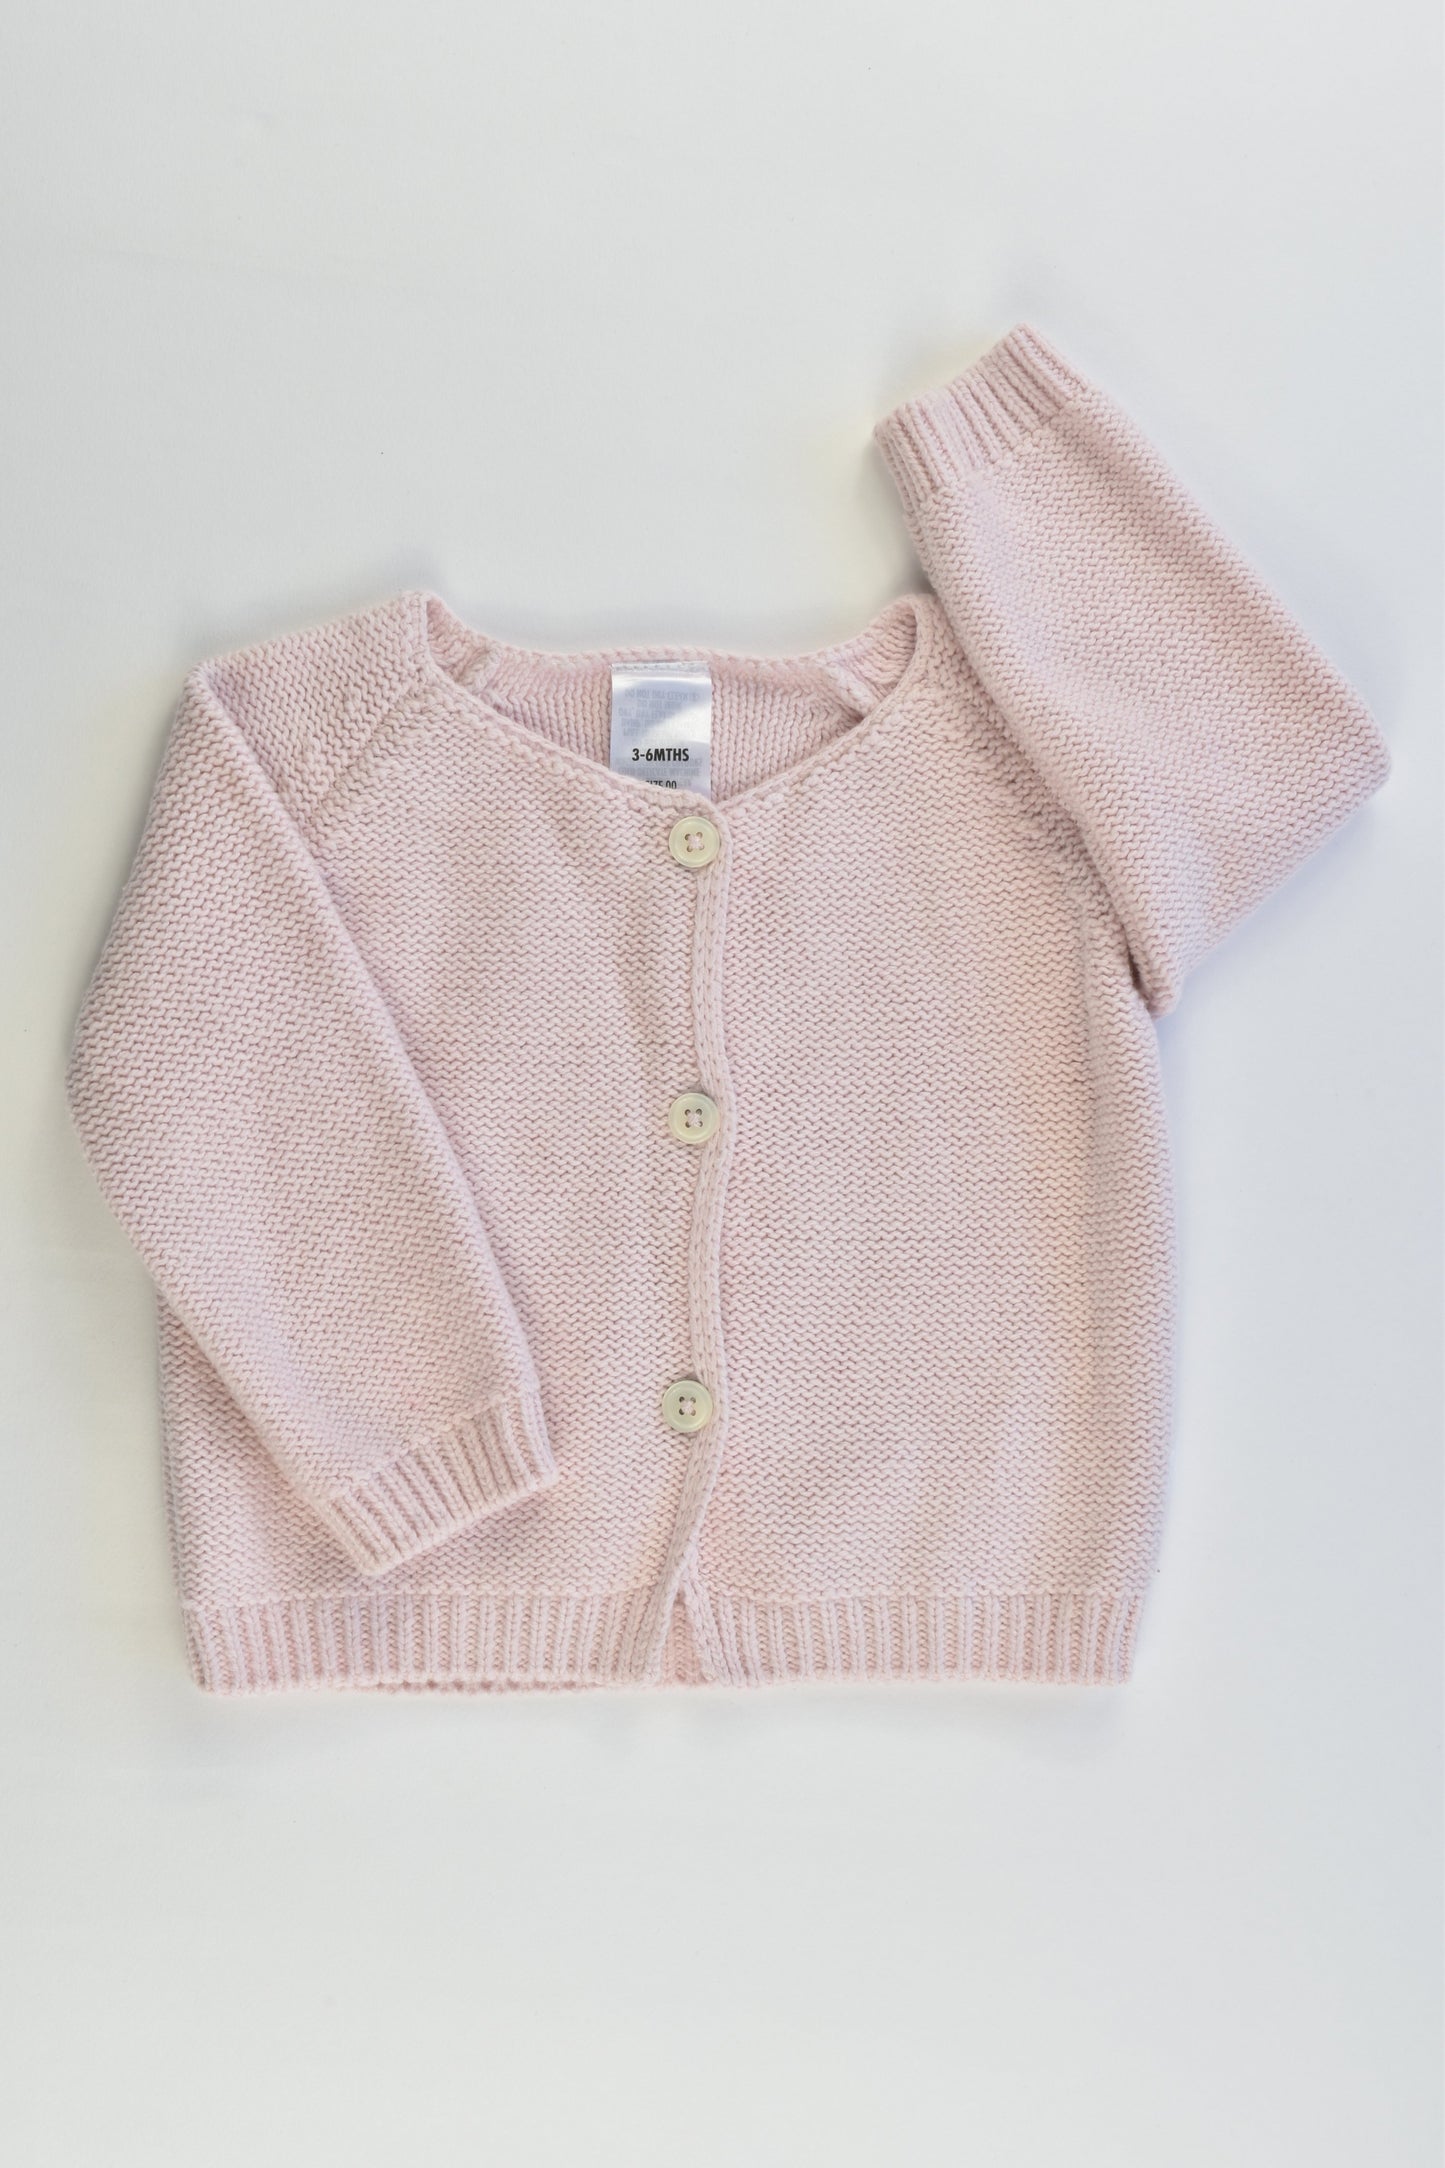 Bonds Size 00 (3-6 months) Knitted Cardigan